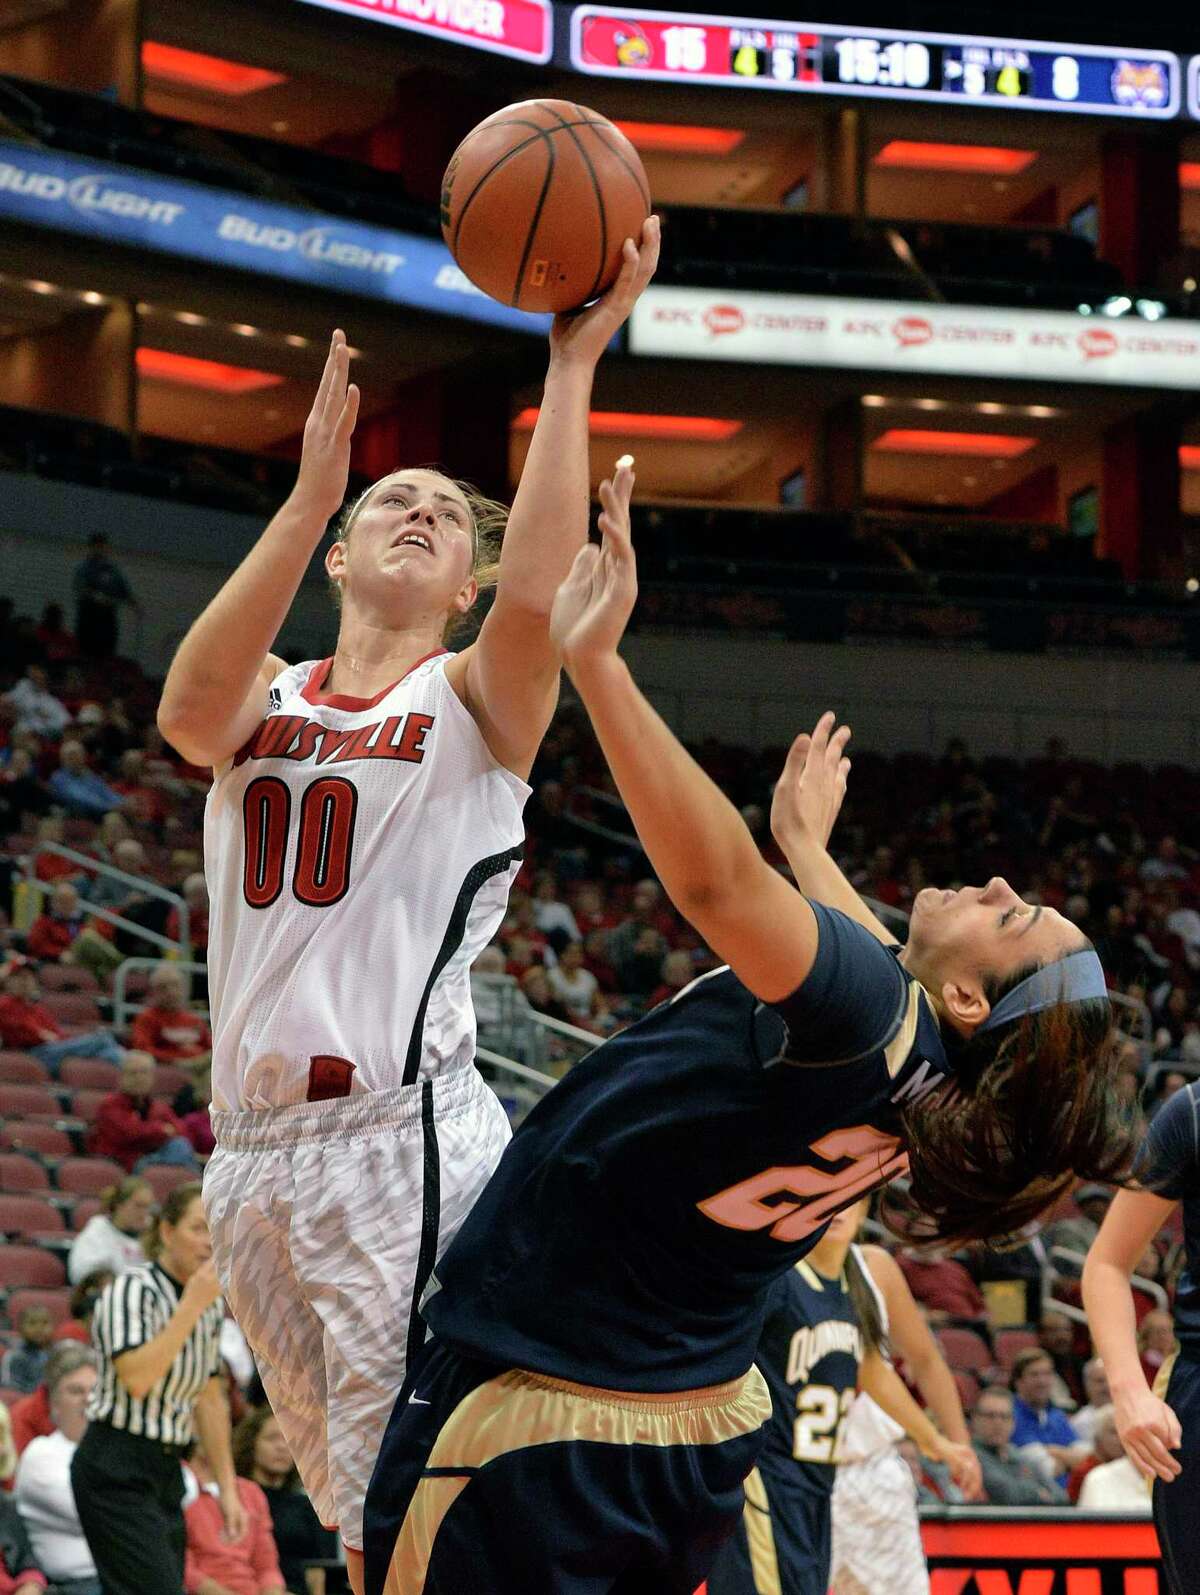 Louisville's Sara Hammond, left, gets a shot off over the defense of Quinnipiac's Brittany McQuain during the first half of an NCAA college basketball game, Monday, Nov. 11, 2013, in Louisville, Ky. (AP Photo/Timothy D. Easley)